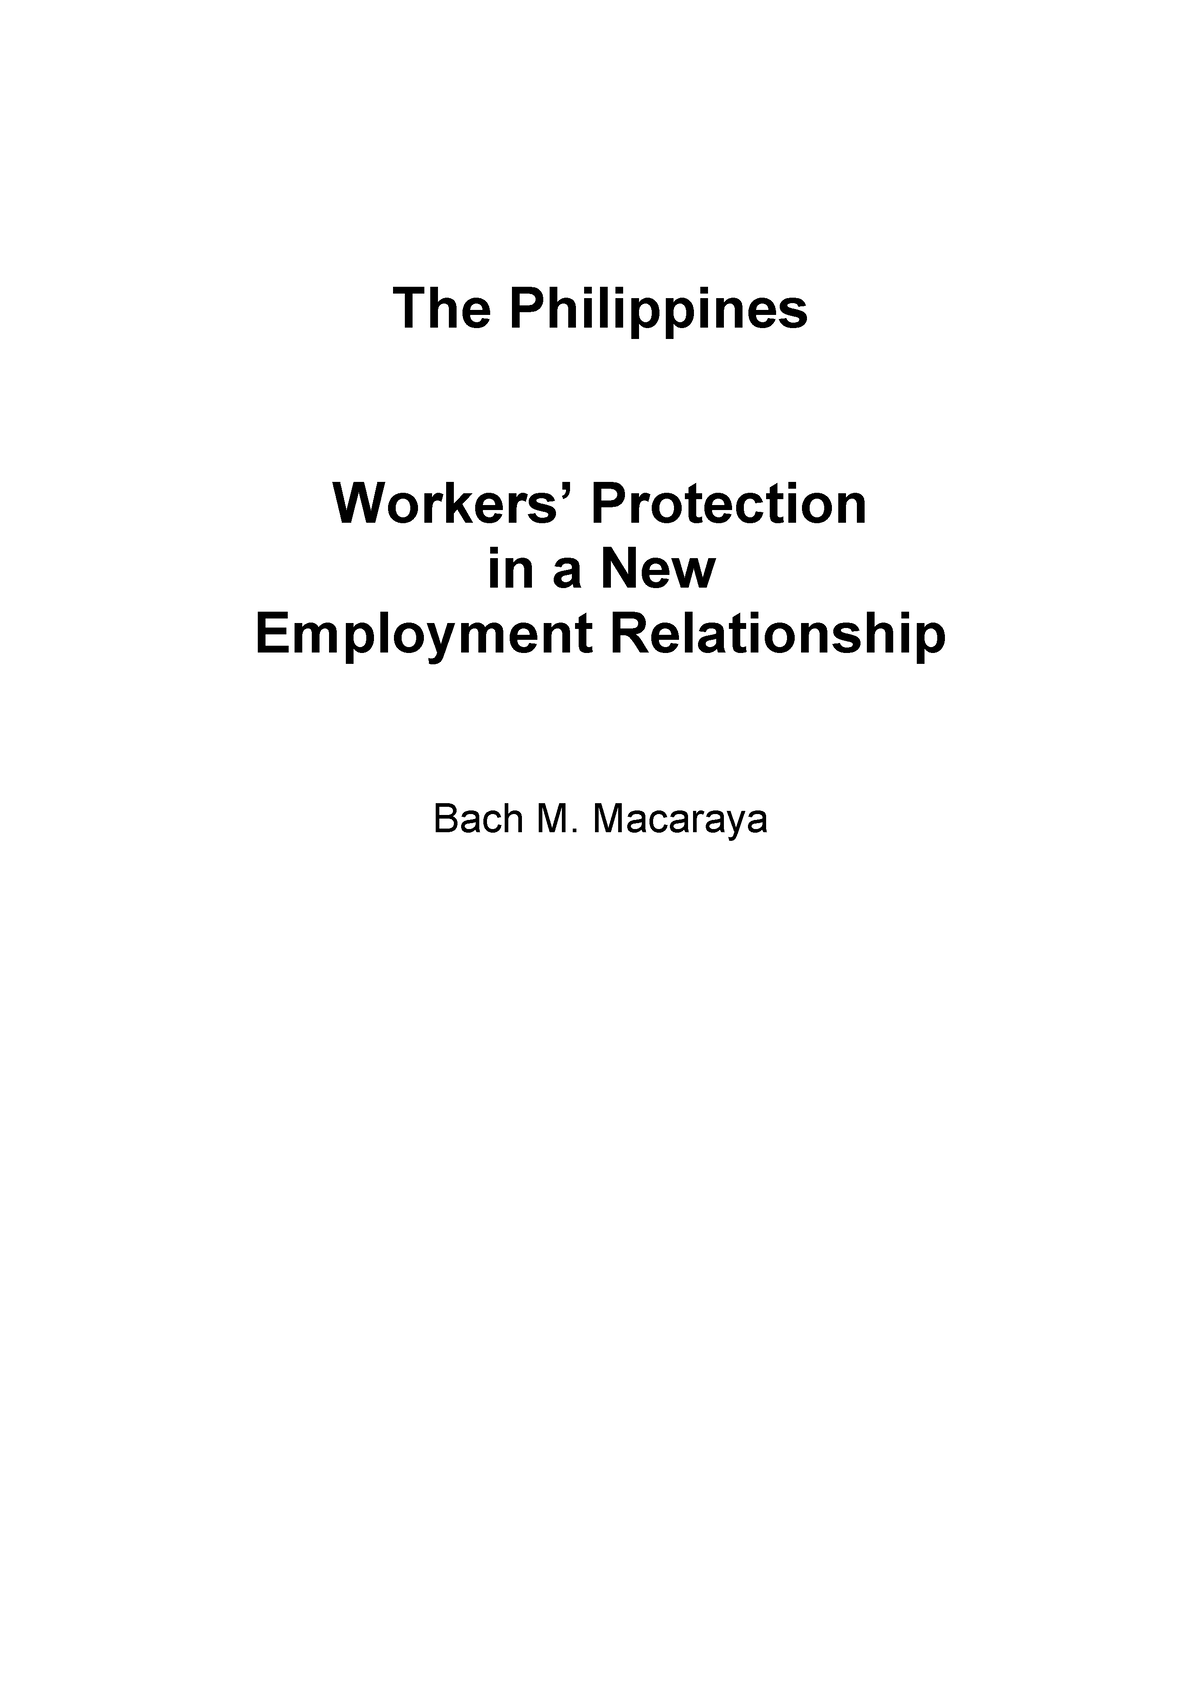 labor-codes-and-regulations-the-philippines-workers-protection-in-a